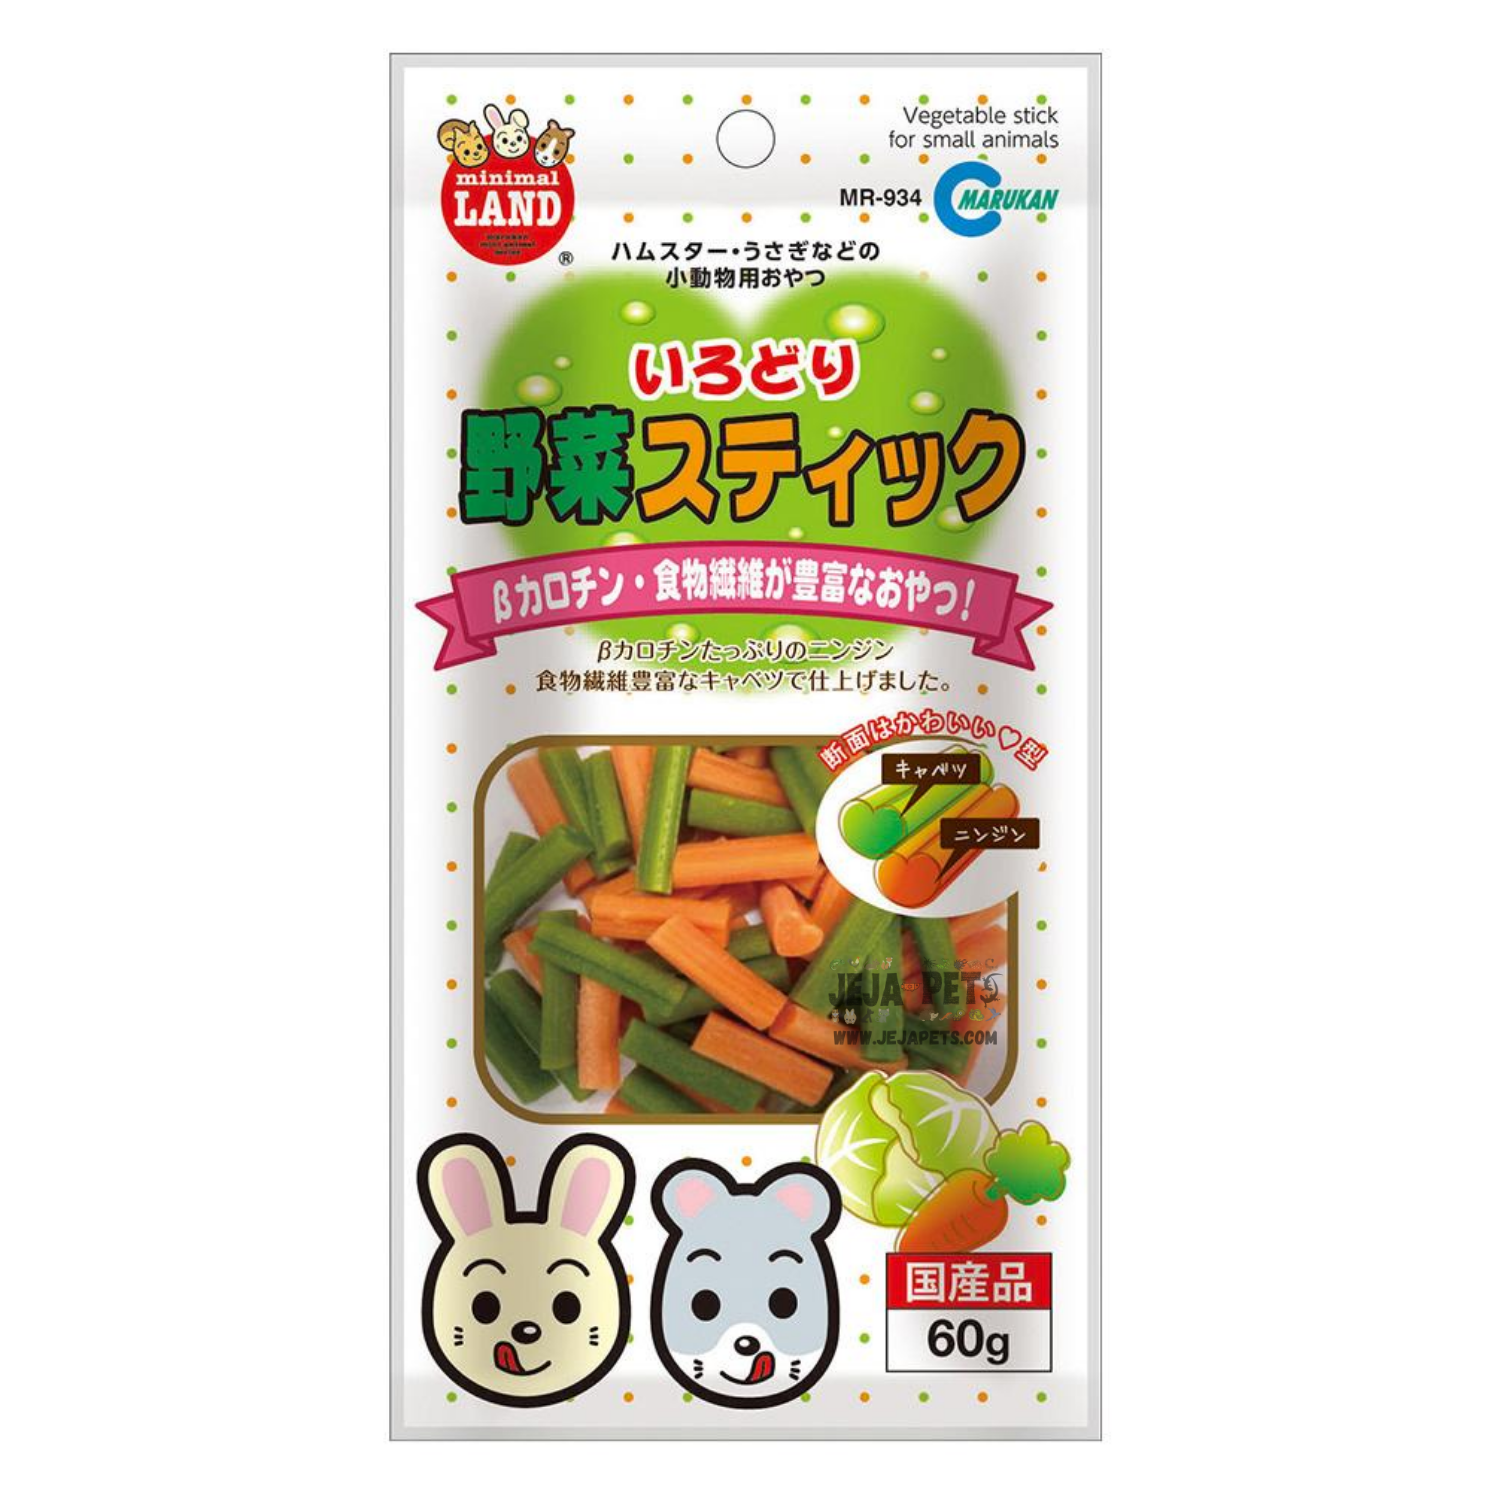 [DISCONTINUED] Marukan Vegetables Stick - 60g